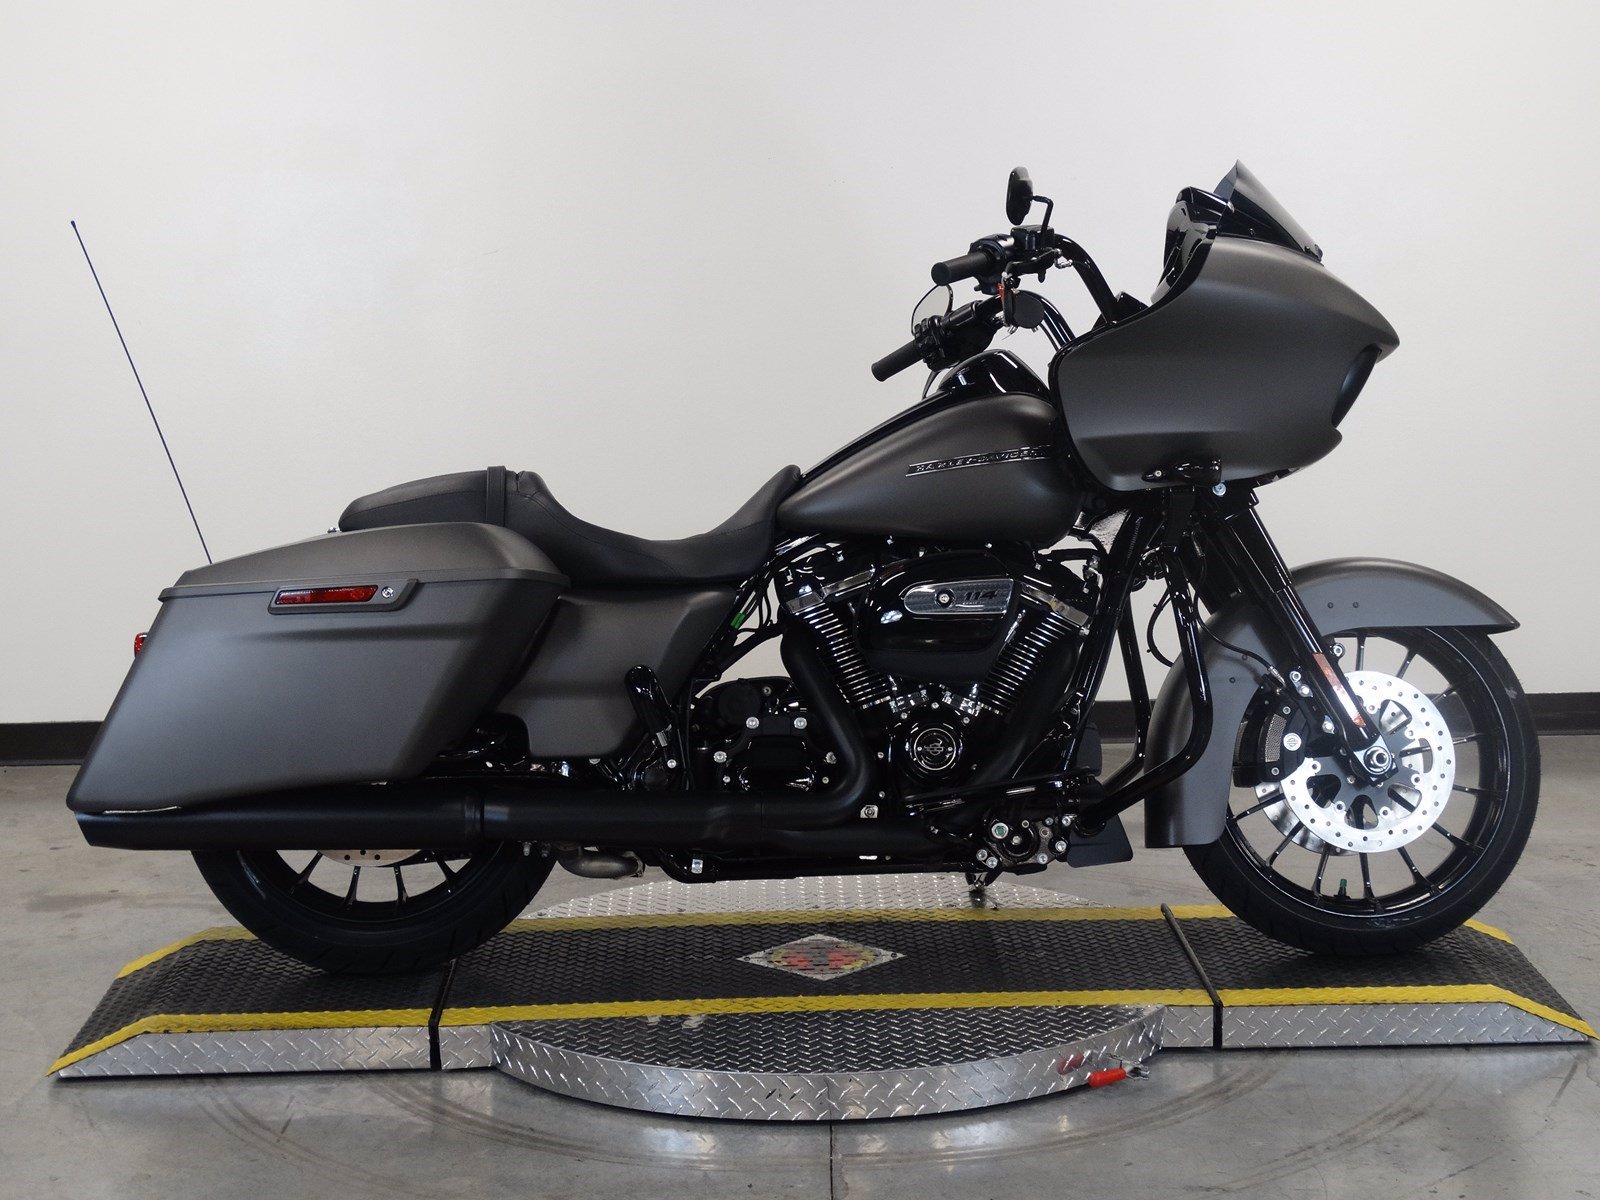 New 2019 Harley-Davidson Road Glide Special FLTRXS Touring in West Palm